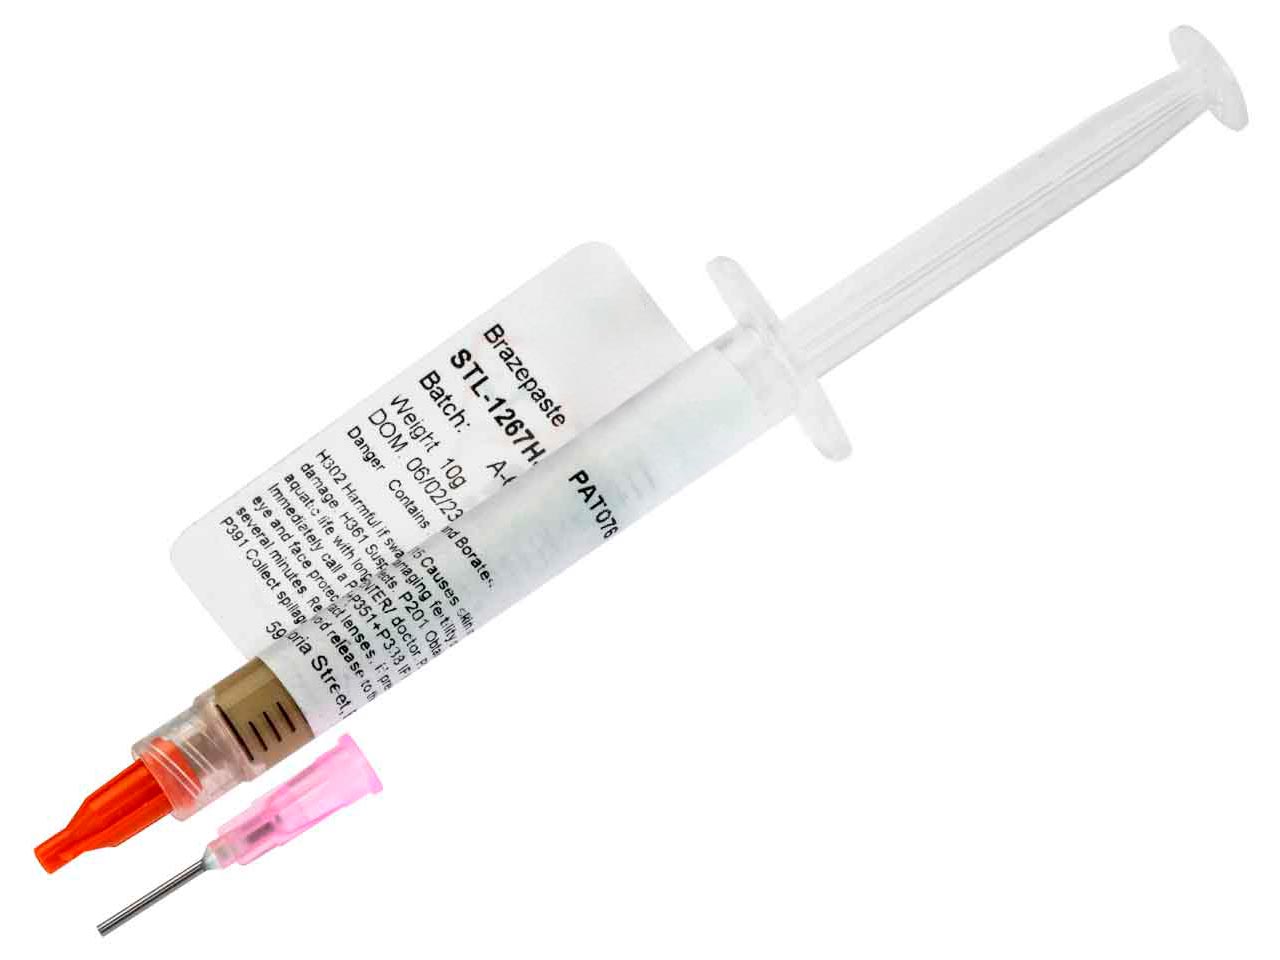 Silver Solder Paste 10g Hard Syringe Questions & Answers